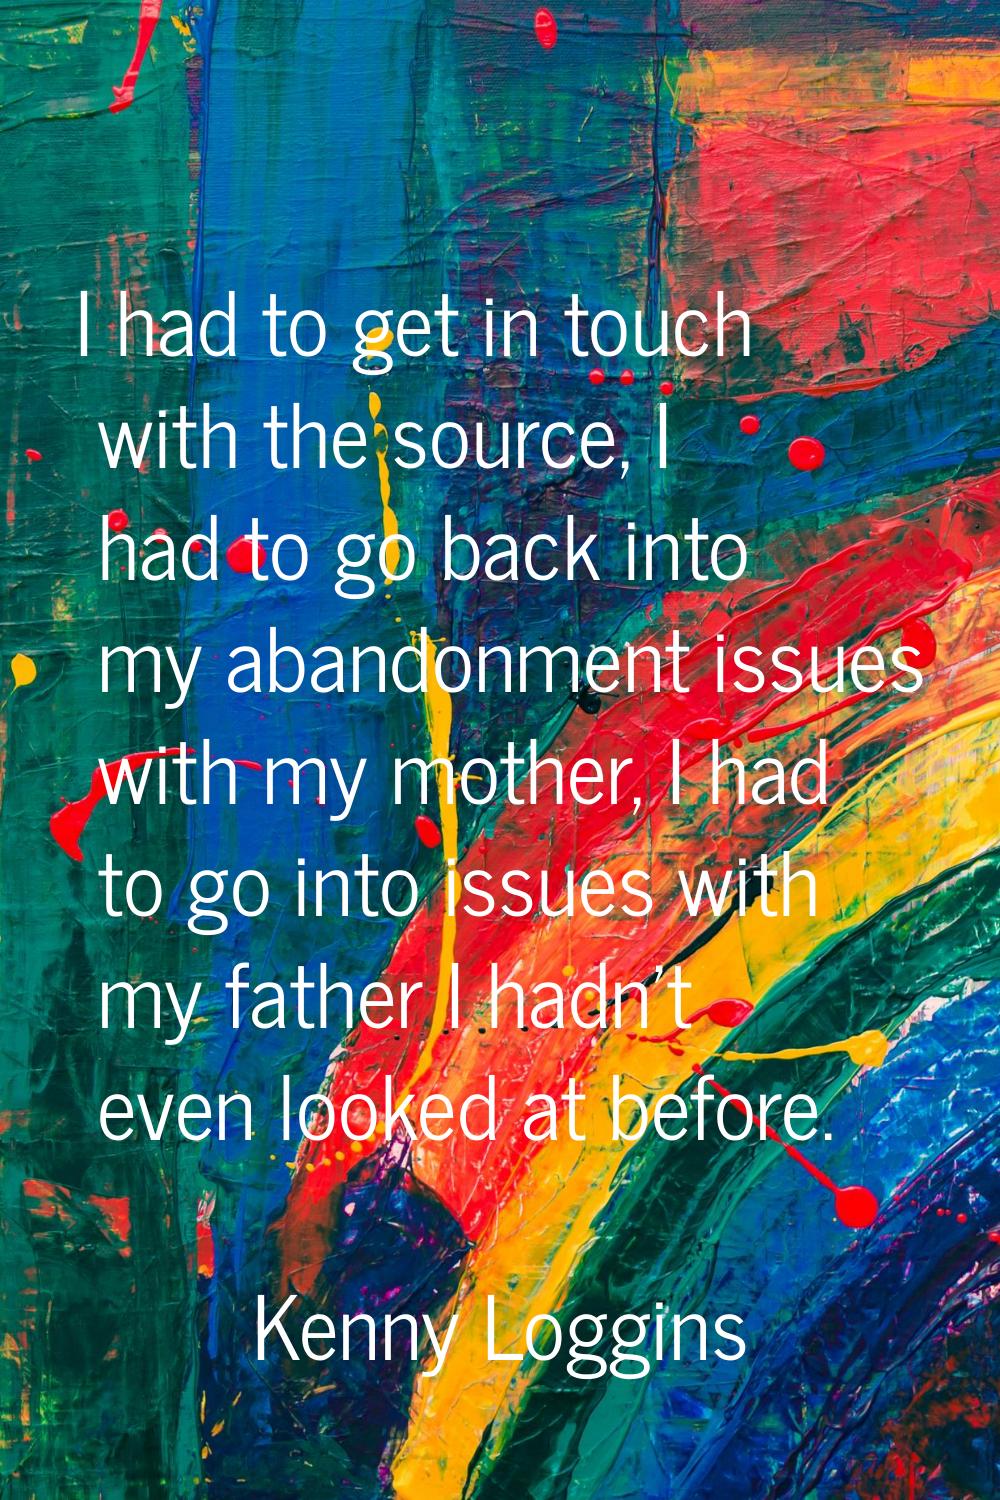 I had to get in touch with the source, I had to go back into my abandonment issues with my mother, 